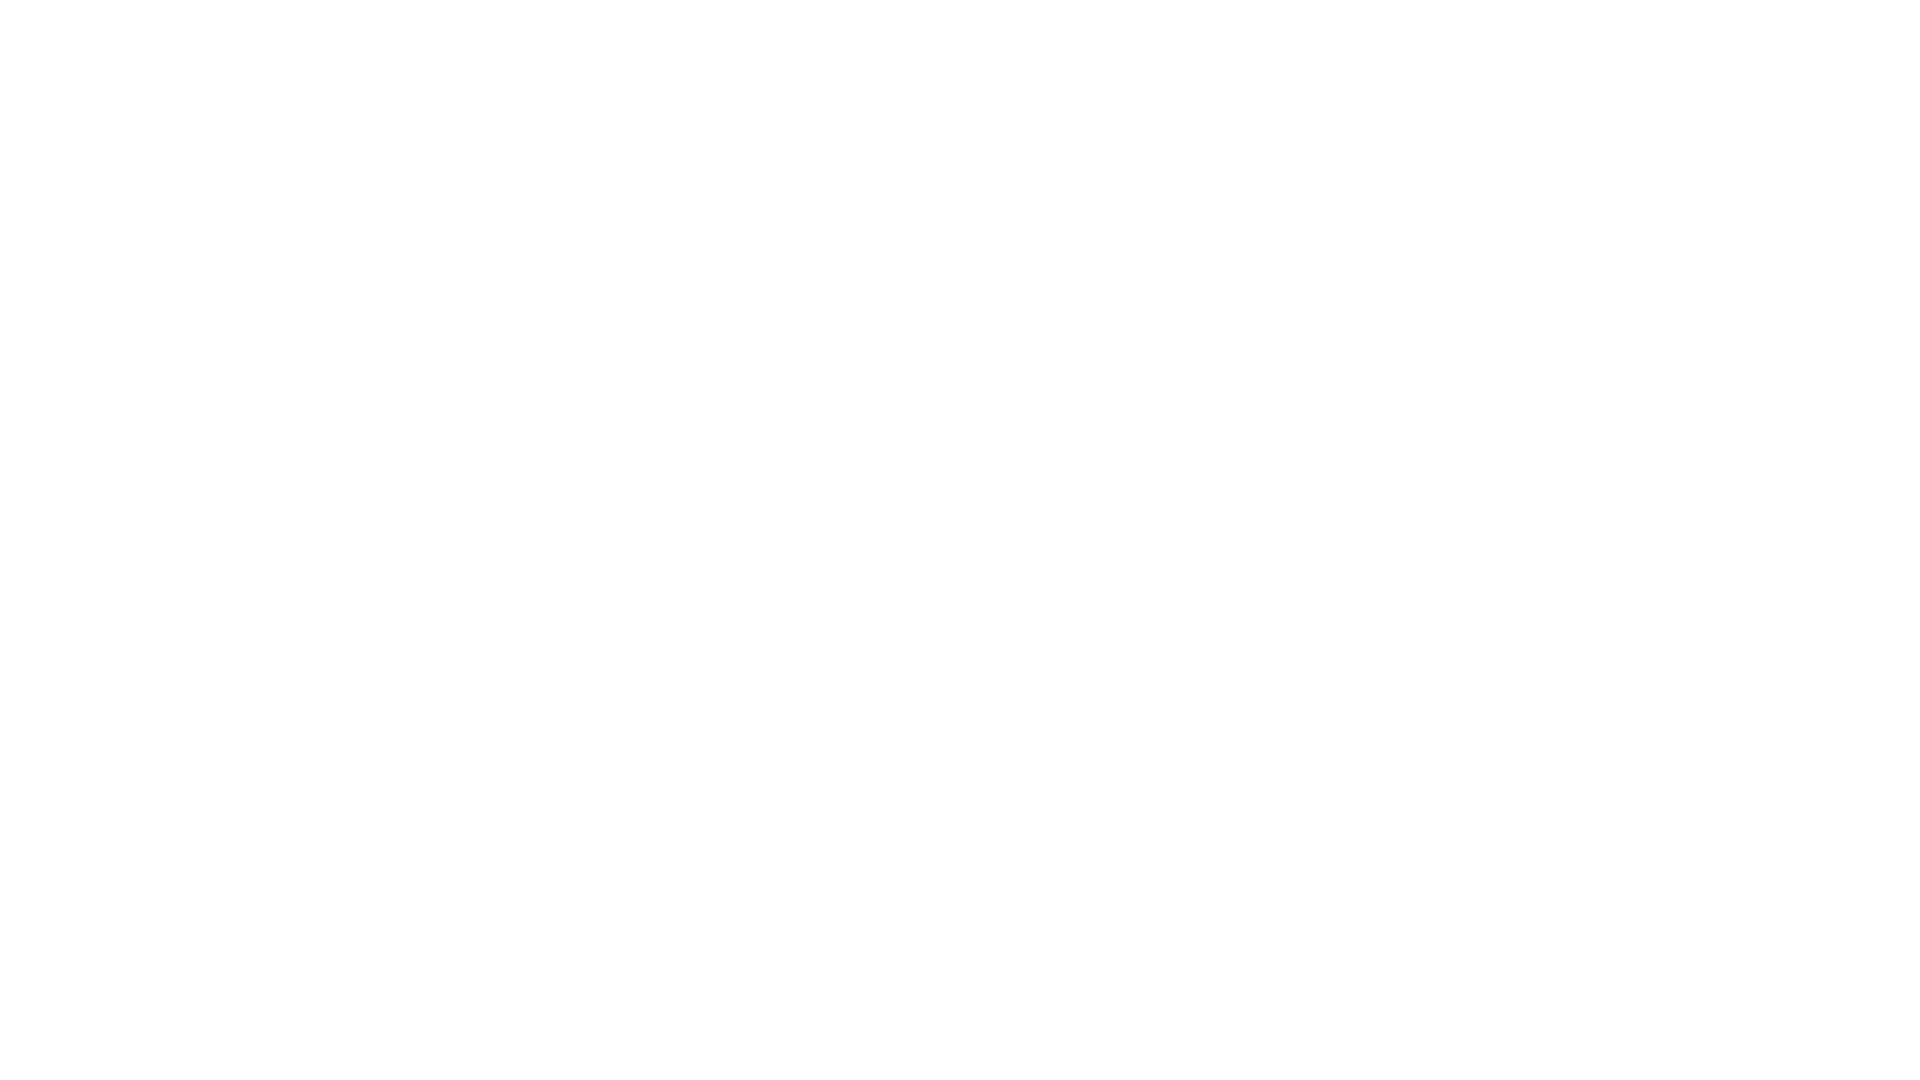 Professional Contractors & Engineers Logo. We Are Ashland, Mo’s #1 Commercial Contractor.